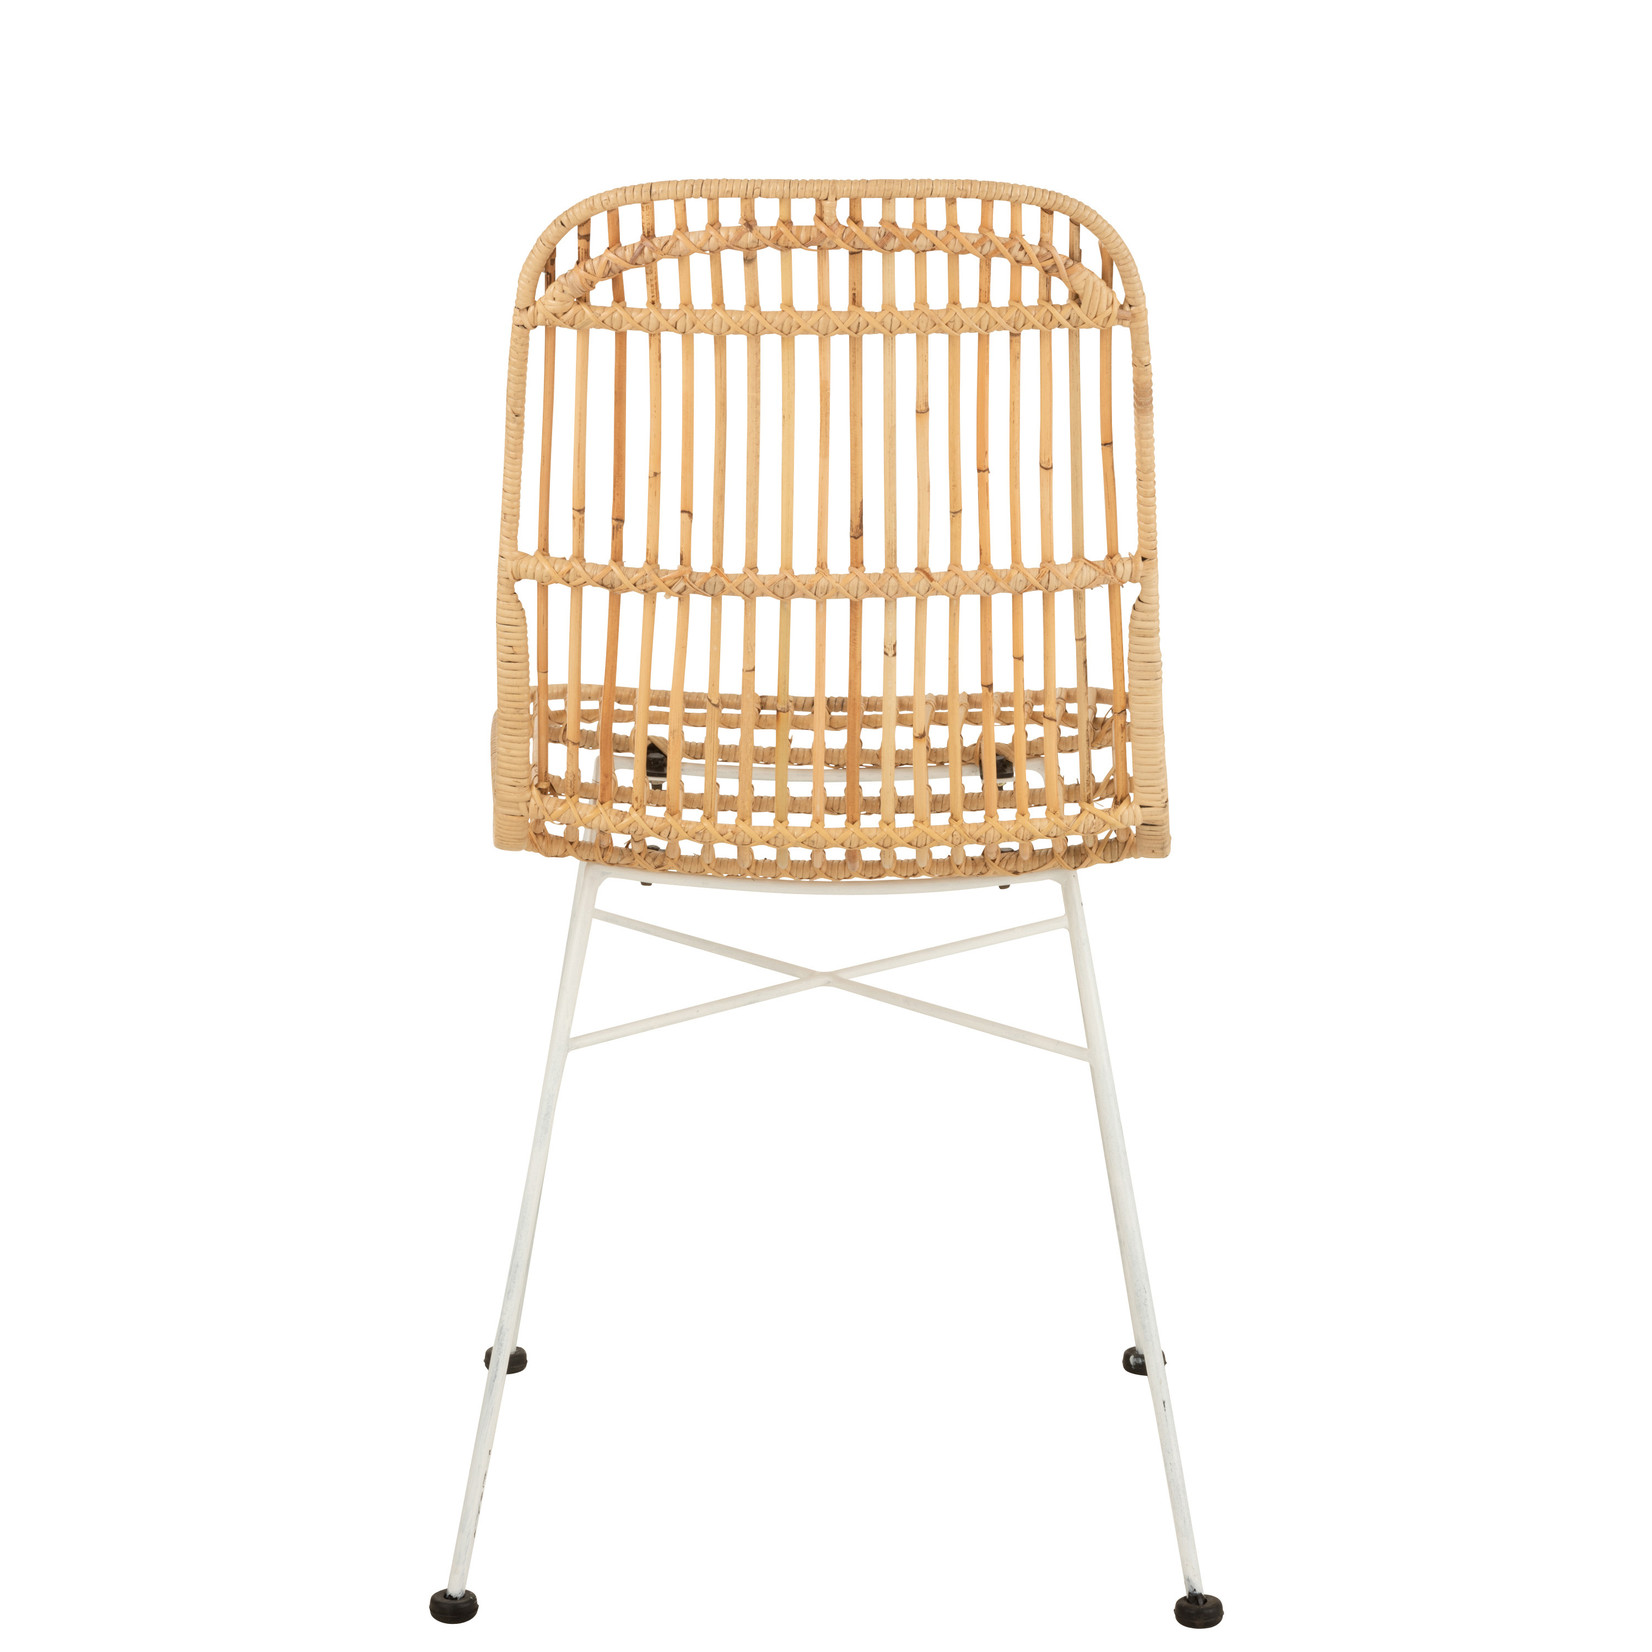 J-Line Dining chair Rural Rattan White Natural Nature